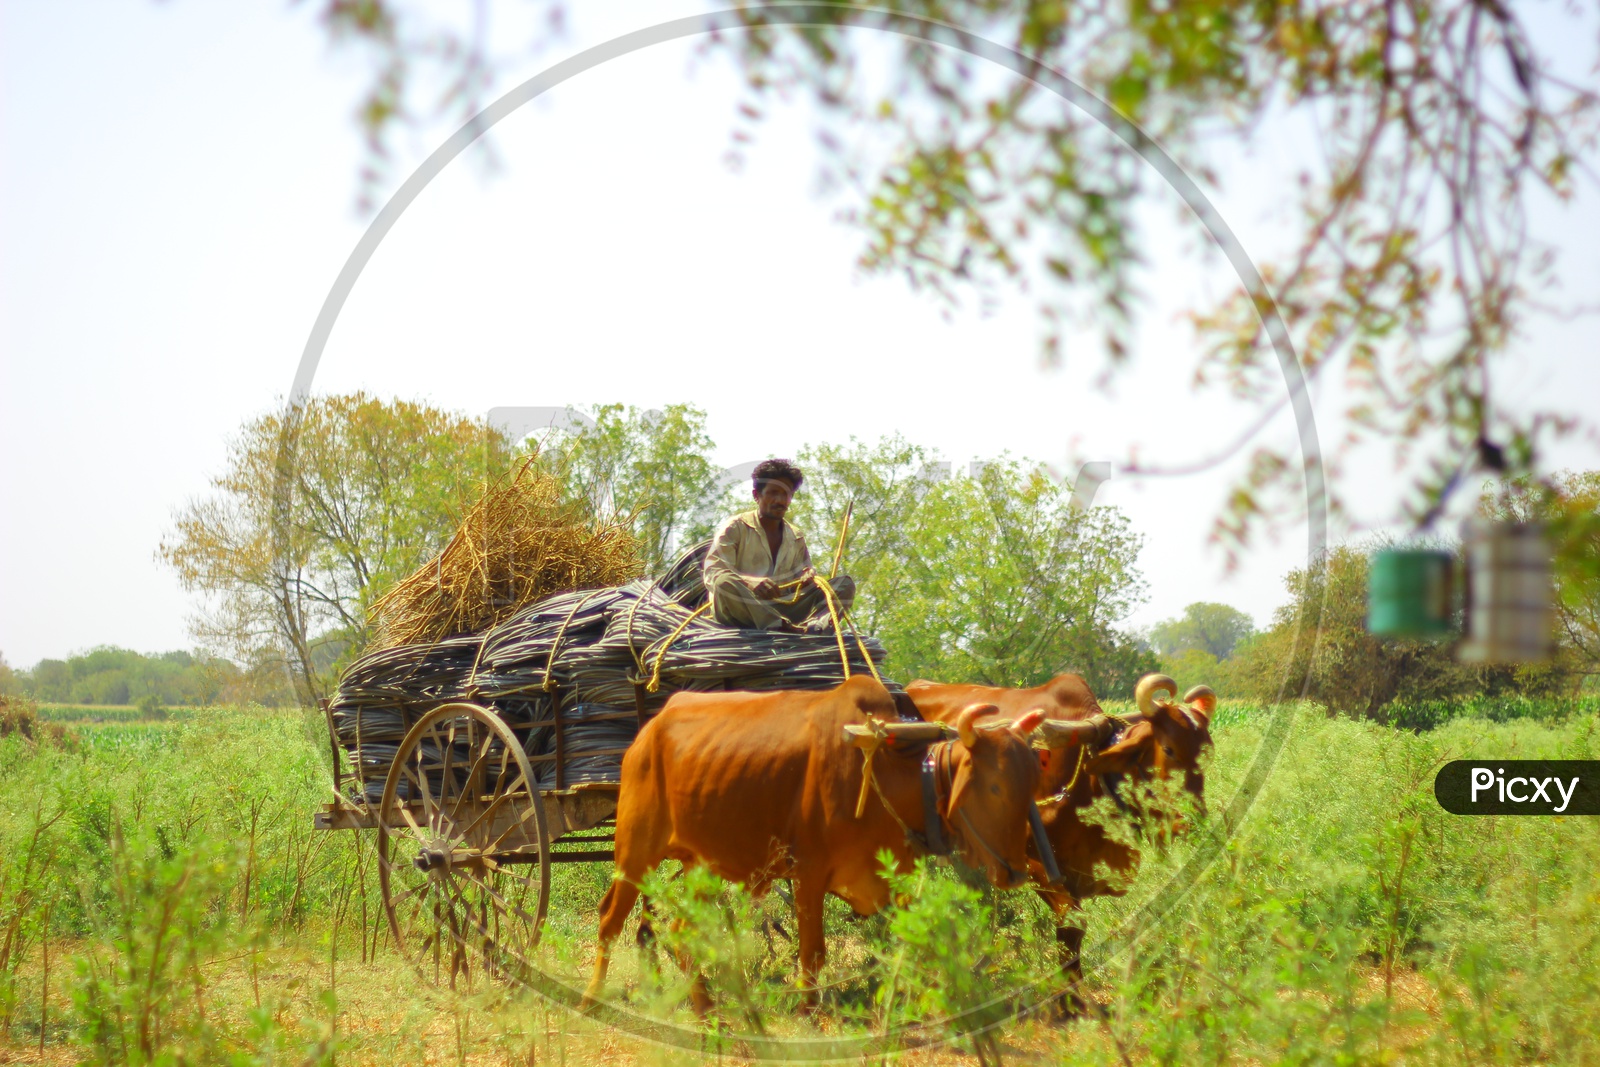 A Bullock Cart Carrying Goods Of a Farmer in an Agricultural Field